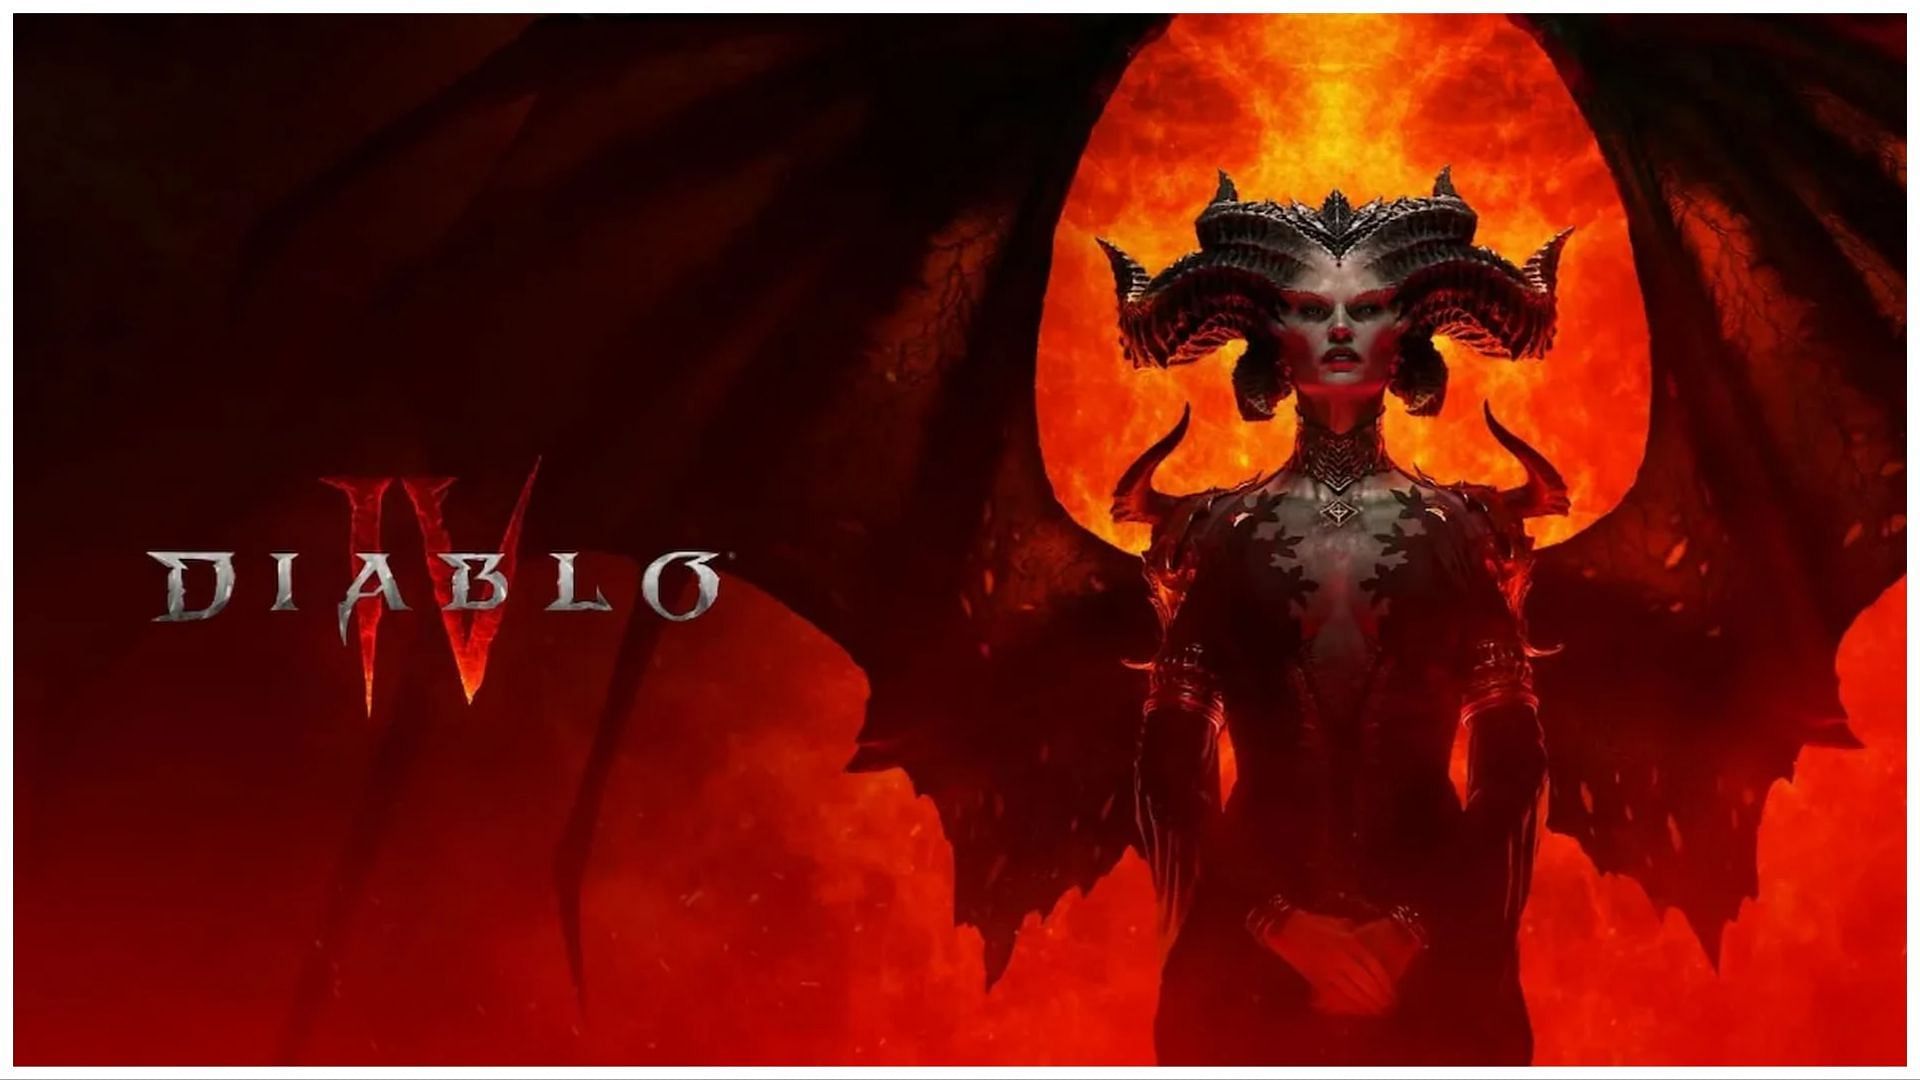 Diablo 4 may be getting another public playtest ahead of its June 6 launch (Image via Blizzard)